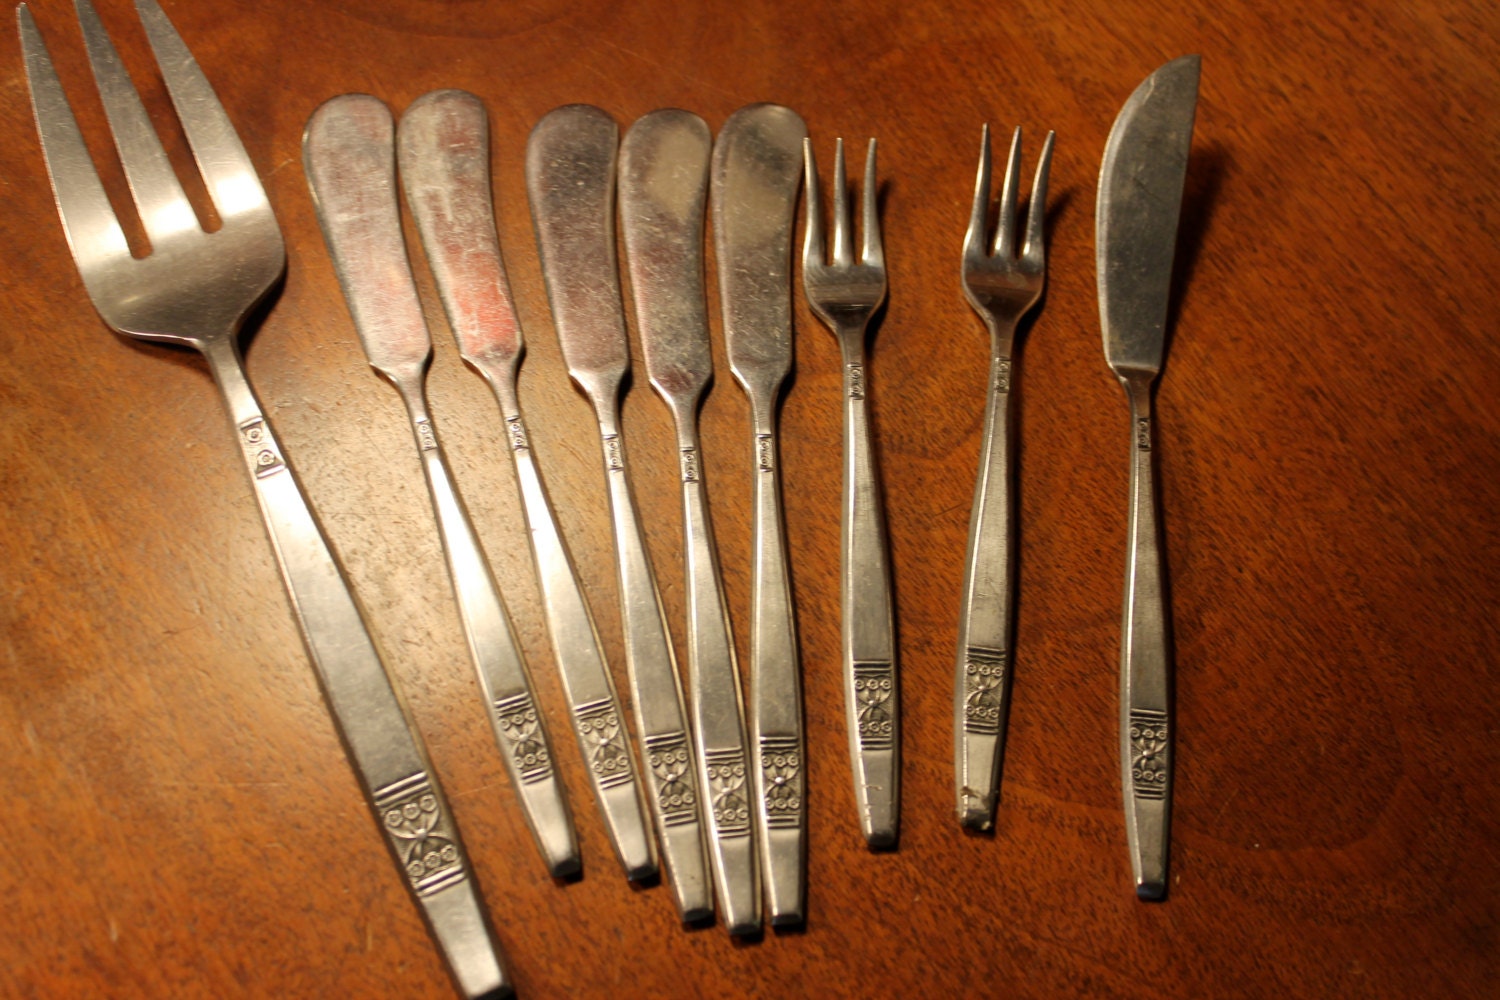 301 Moved Permanently Vintage Stainless Steel Flatware Japan